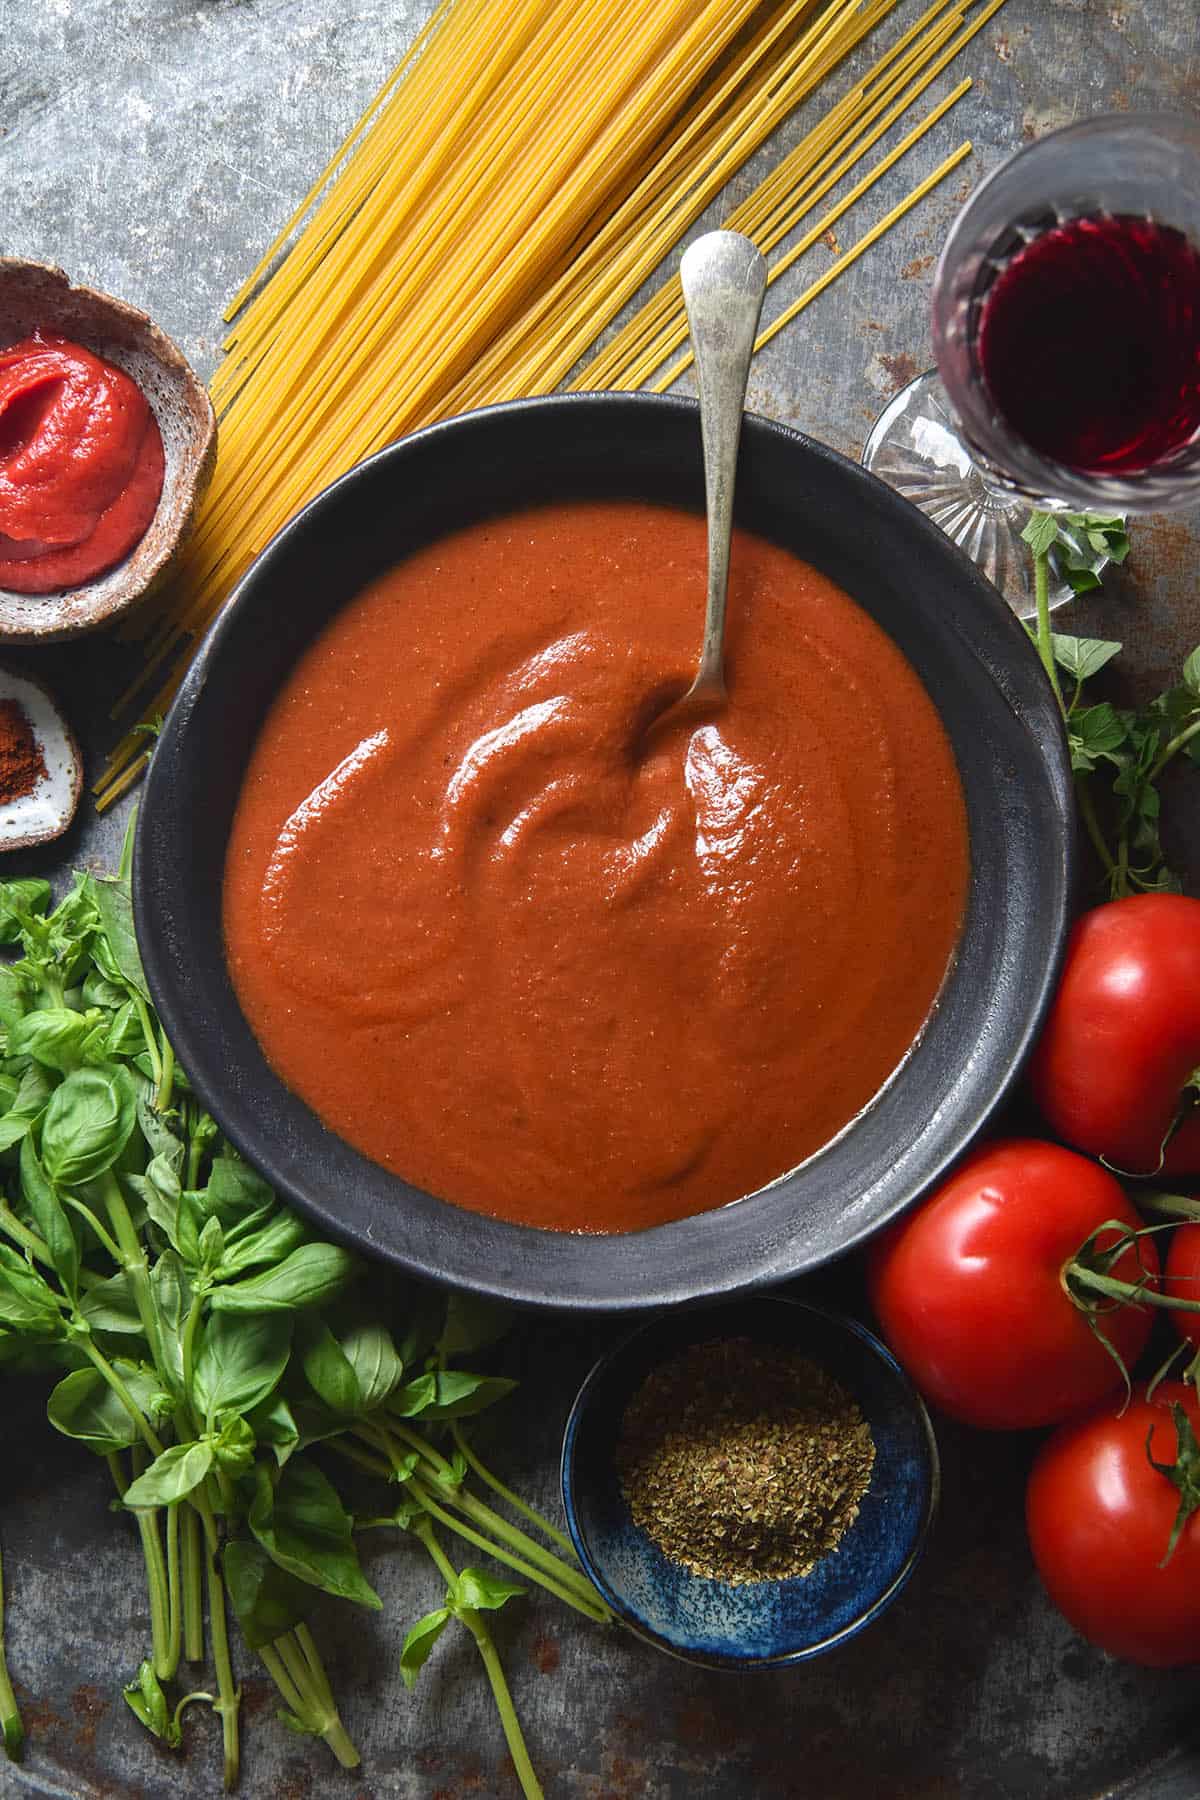 An aerial view of a grey ceramic metal bowl filled with low FODMAP pasta sauce. Surrounding the bowl are pasta ingredients, casually arranged on a medium blue steel backdrop